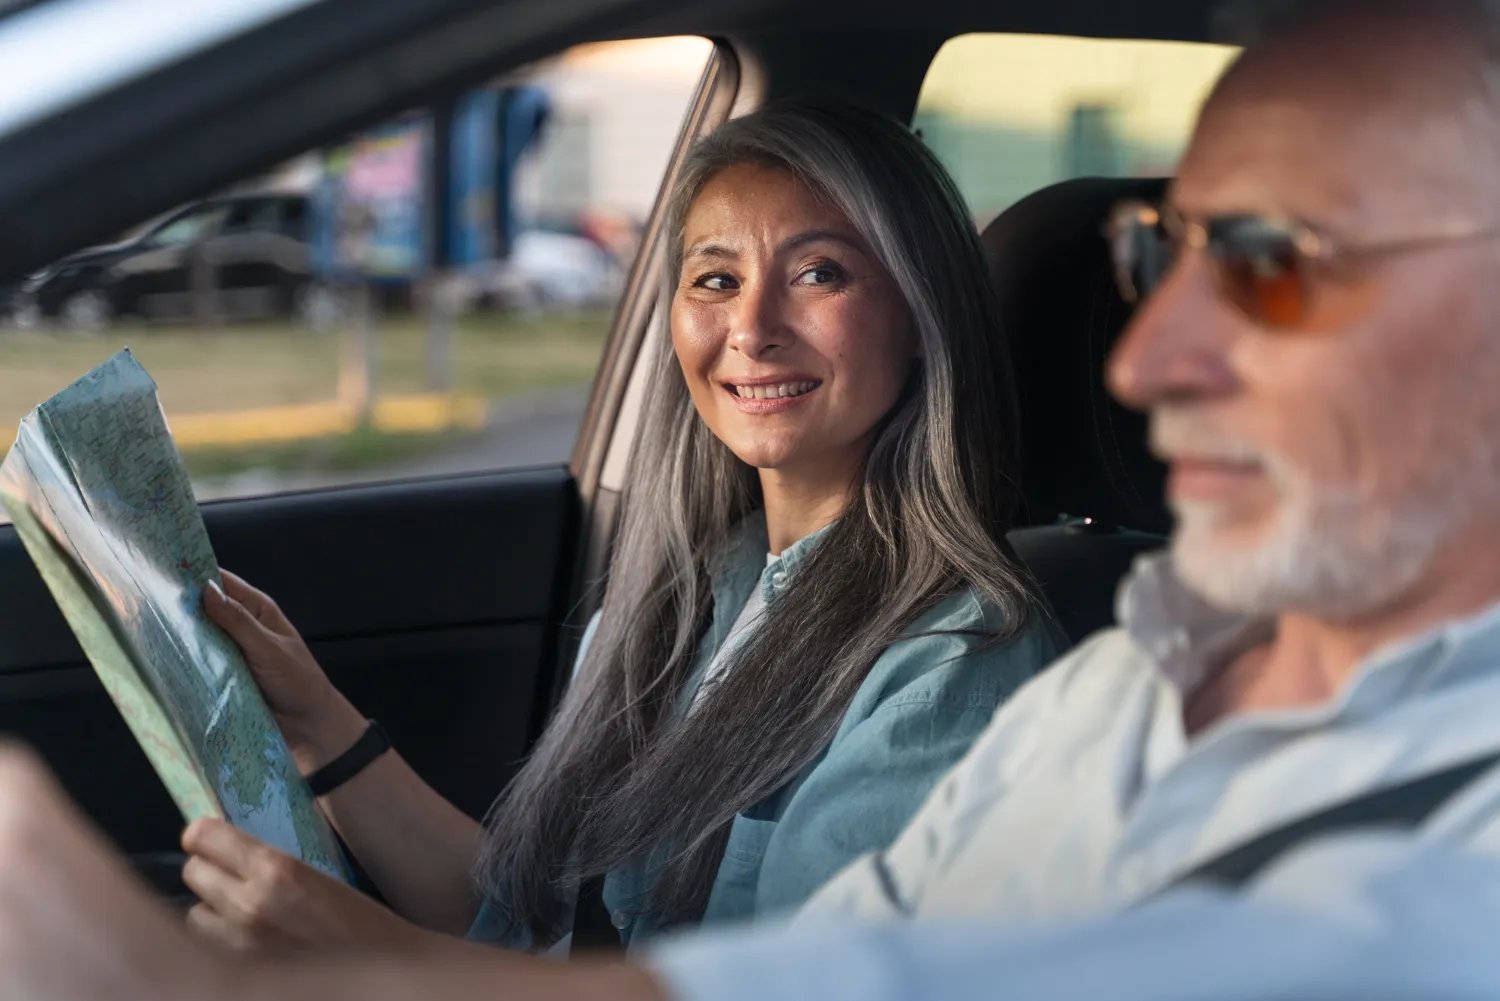 Seniors and Driving: Safe Practices and Continuing Education